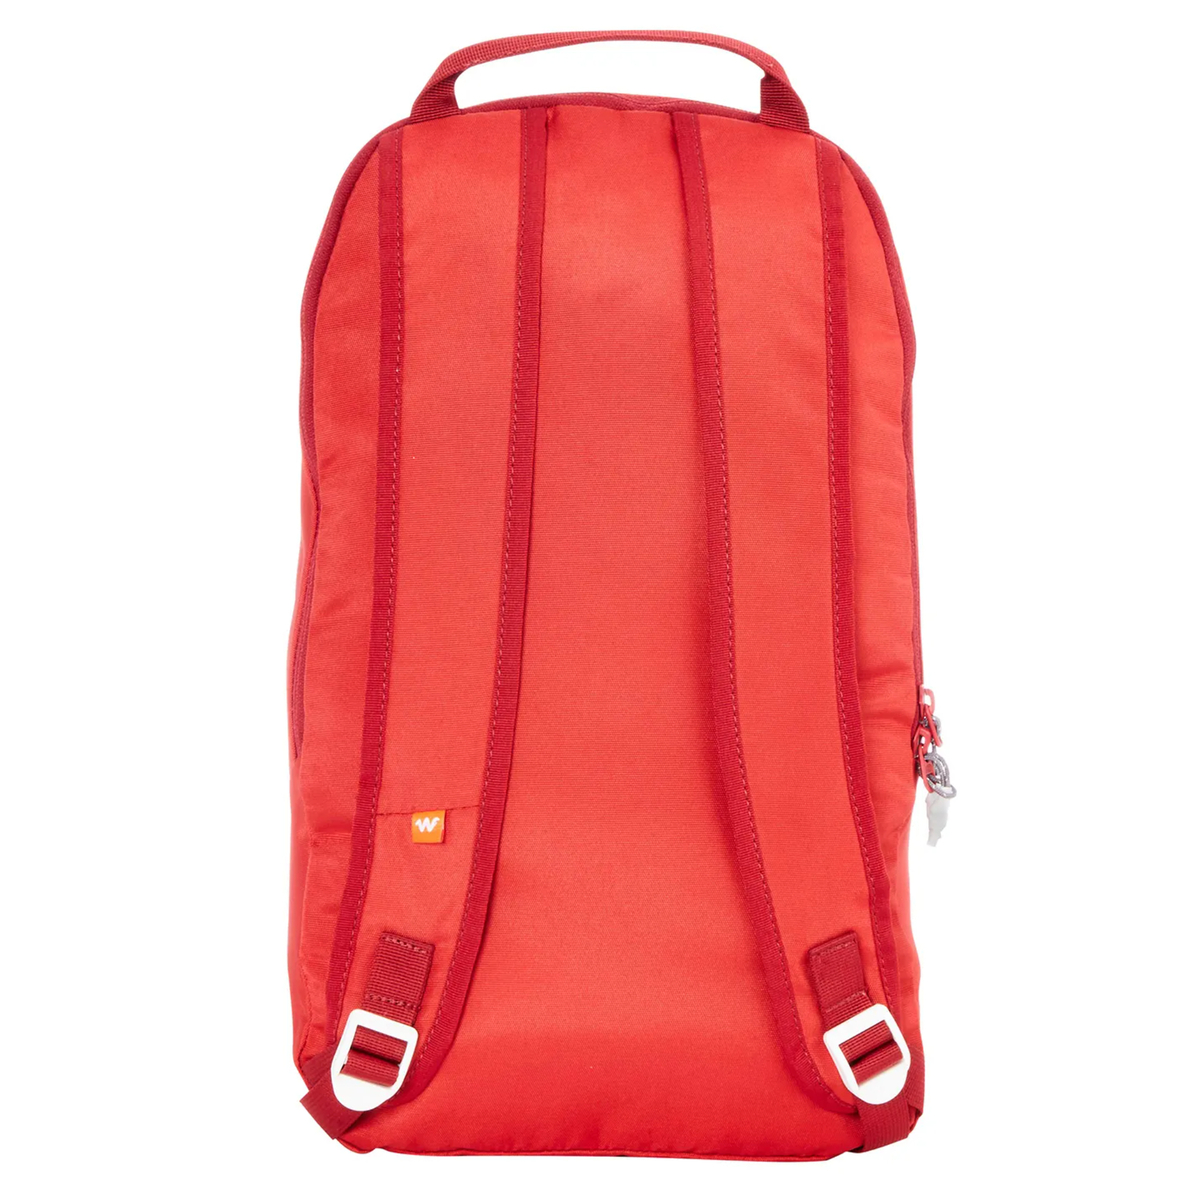 Wildcraft Pebble 3 New Backpack, Red